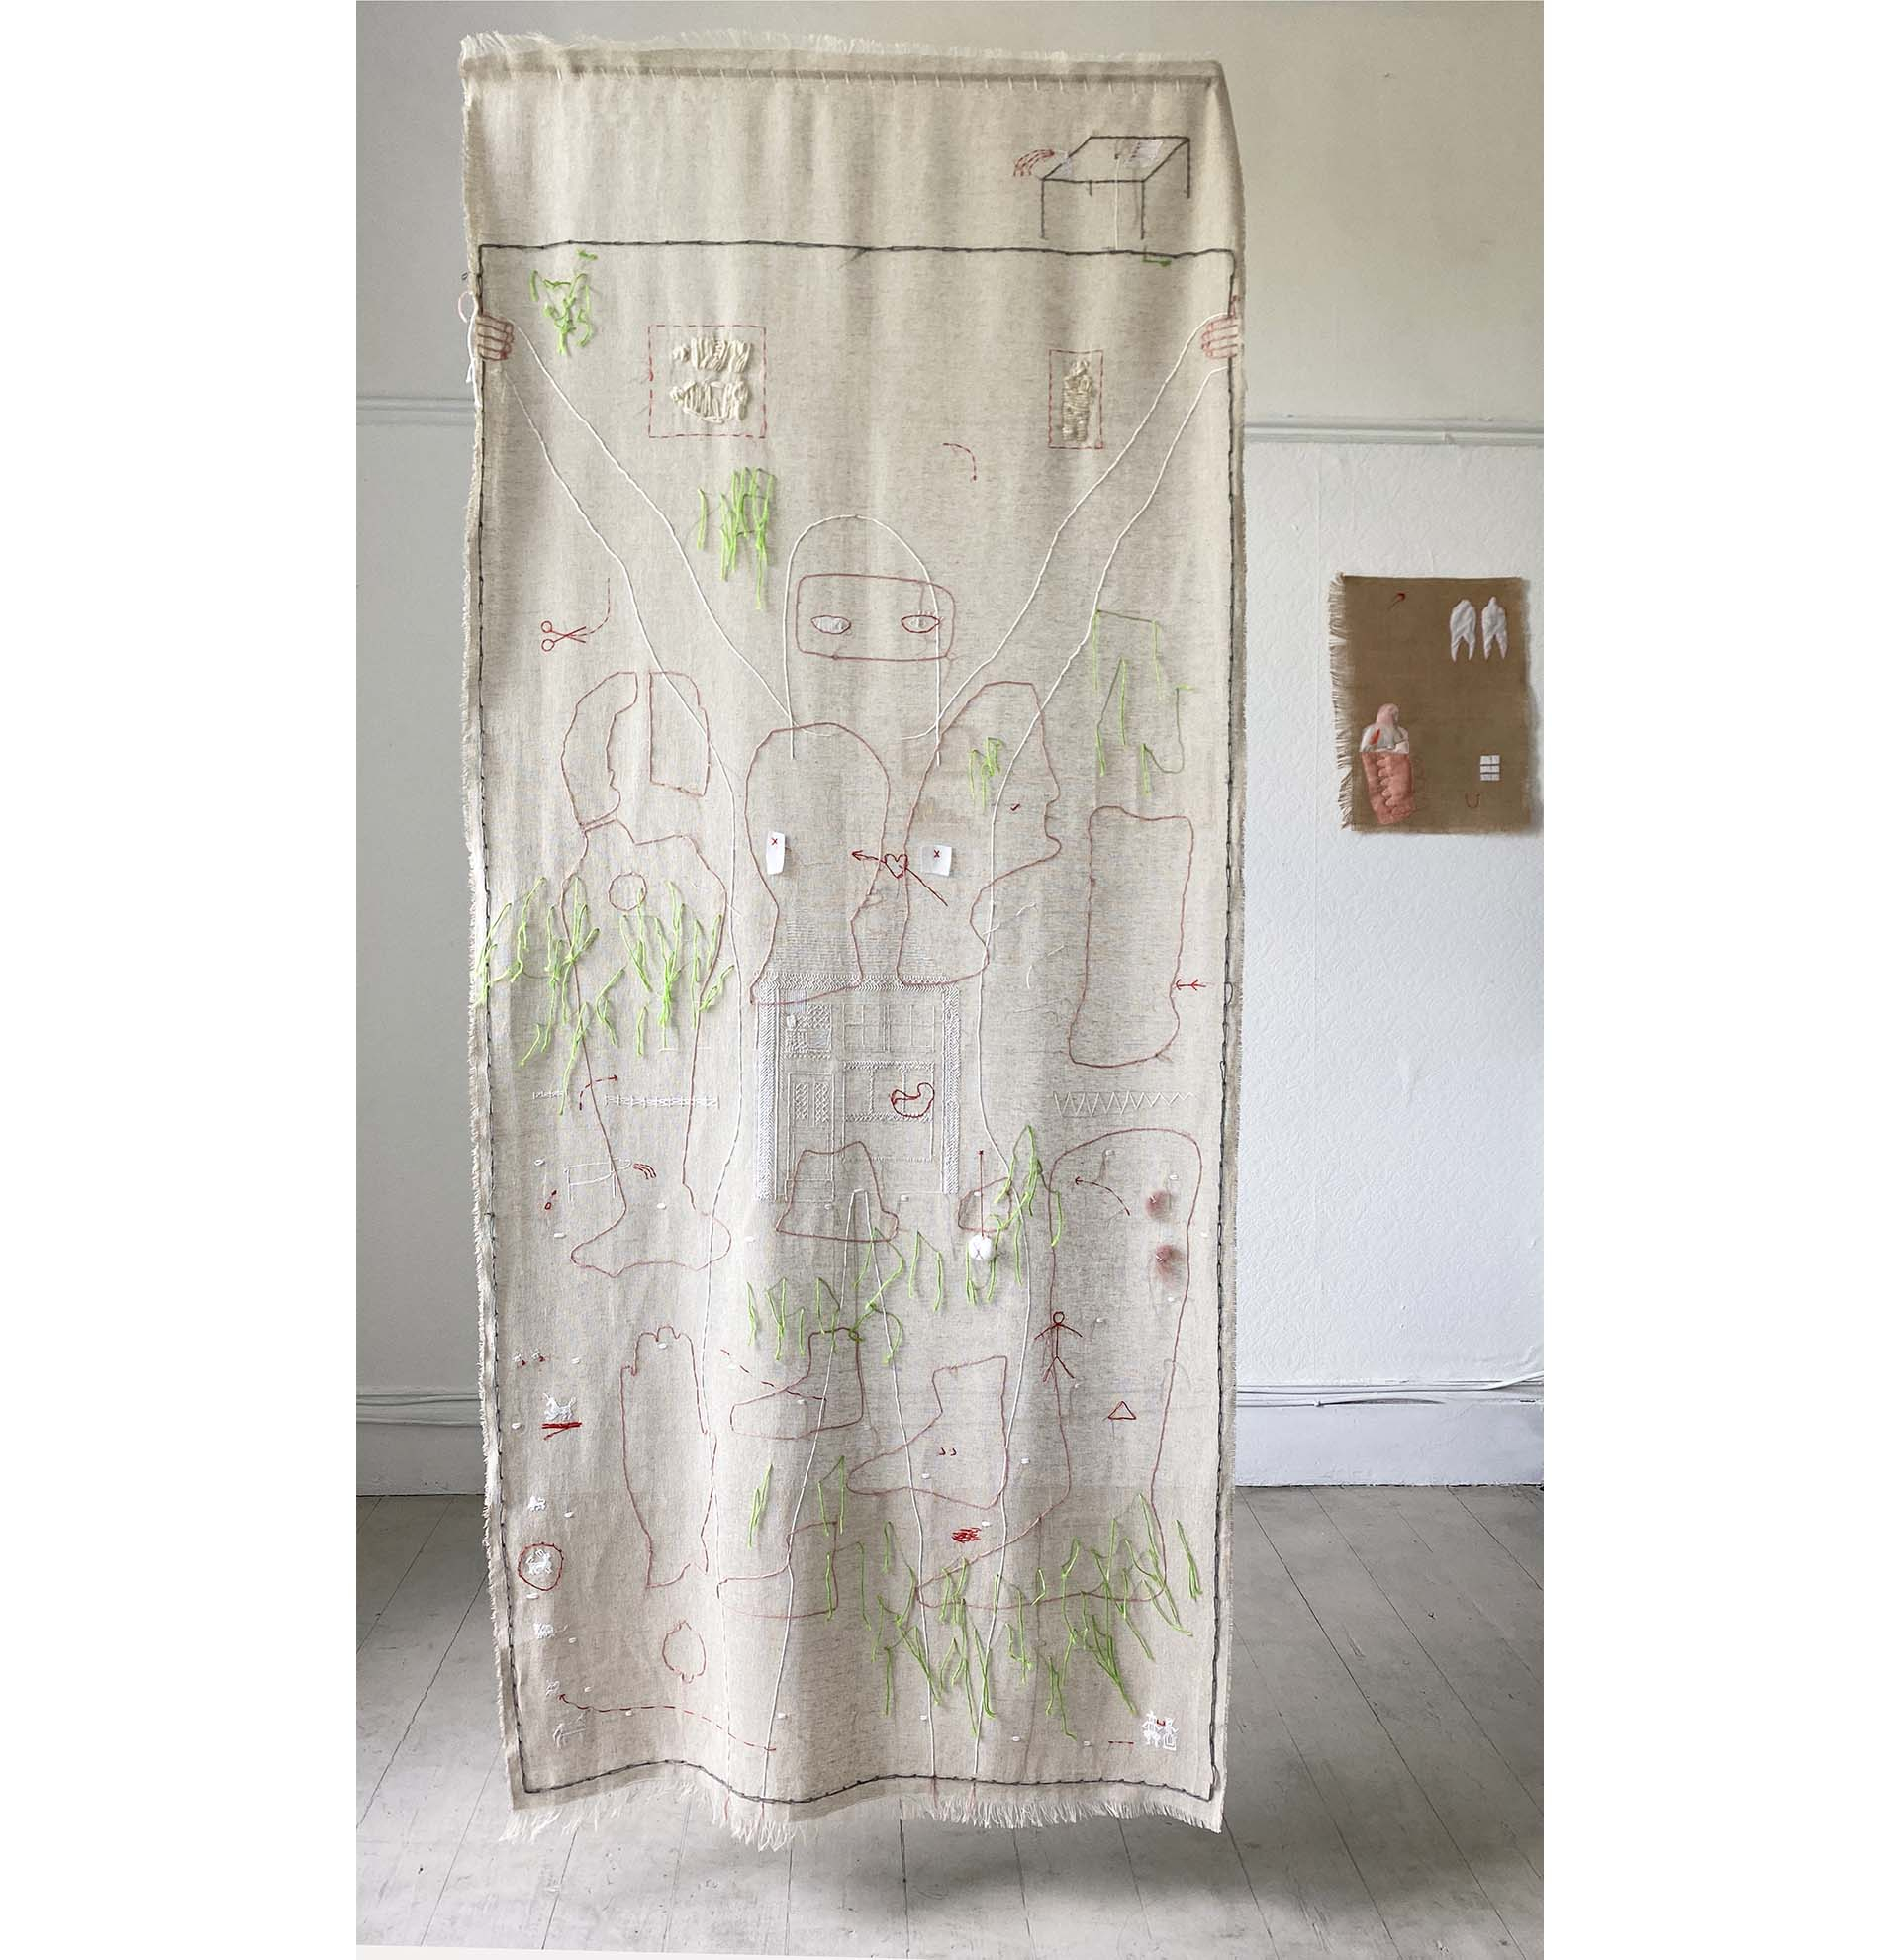 Tracked and traced, 220cm x 95cm, mixed media embroidery, 2021